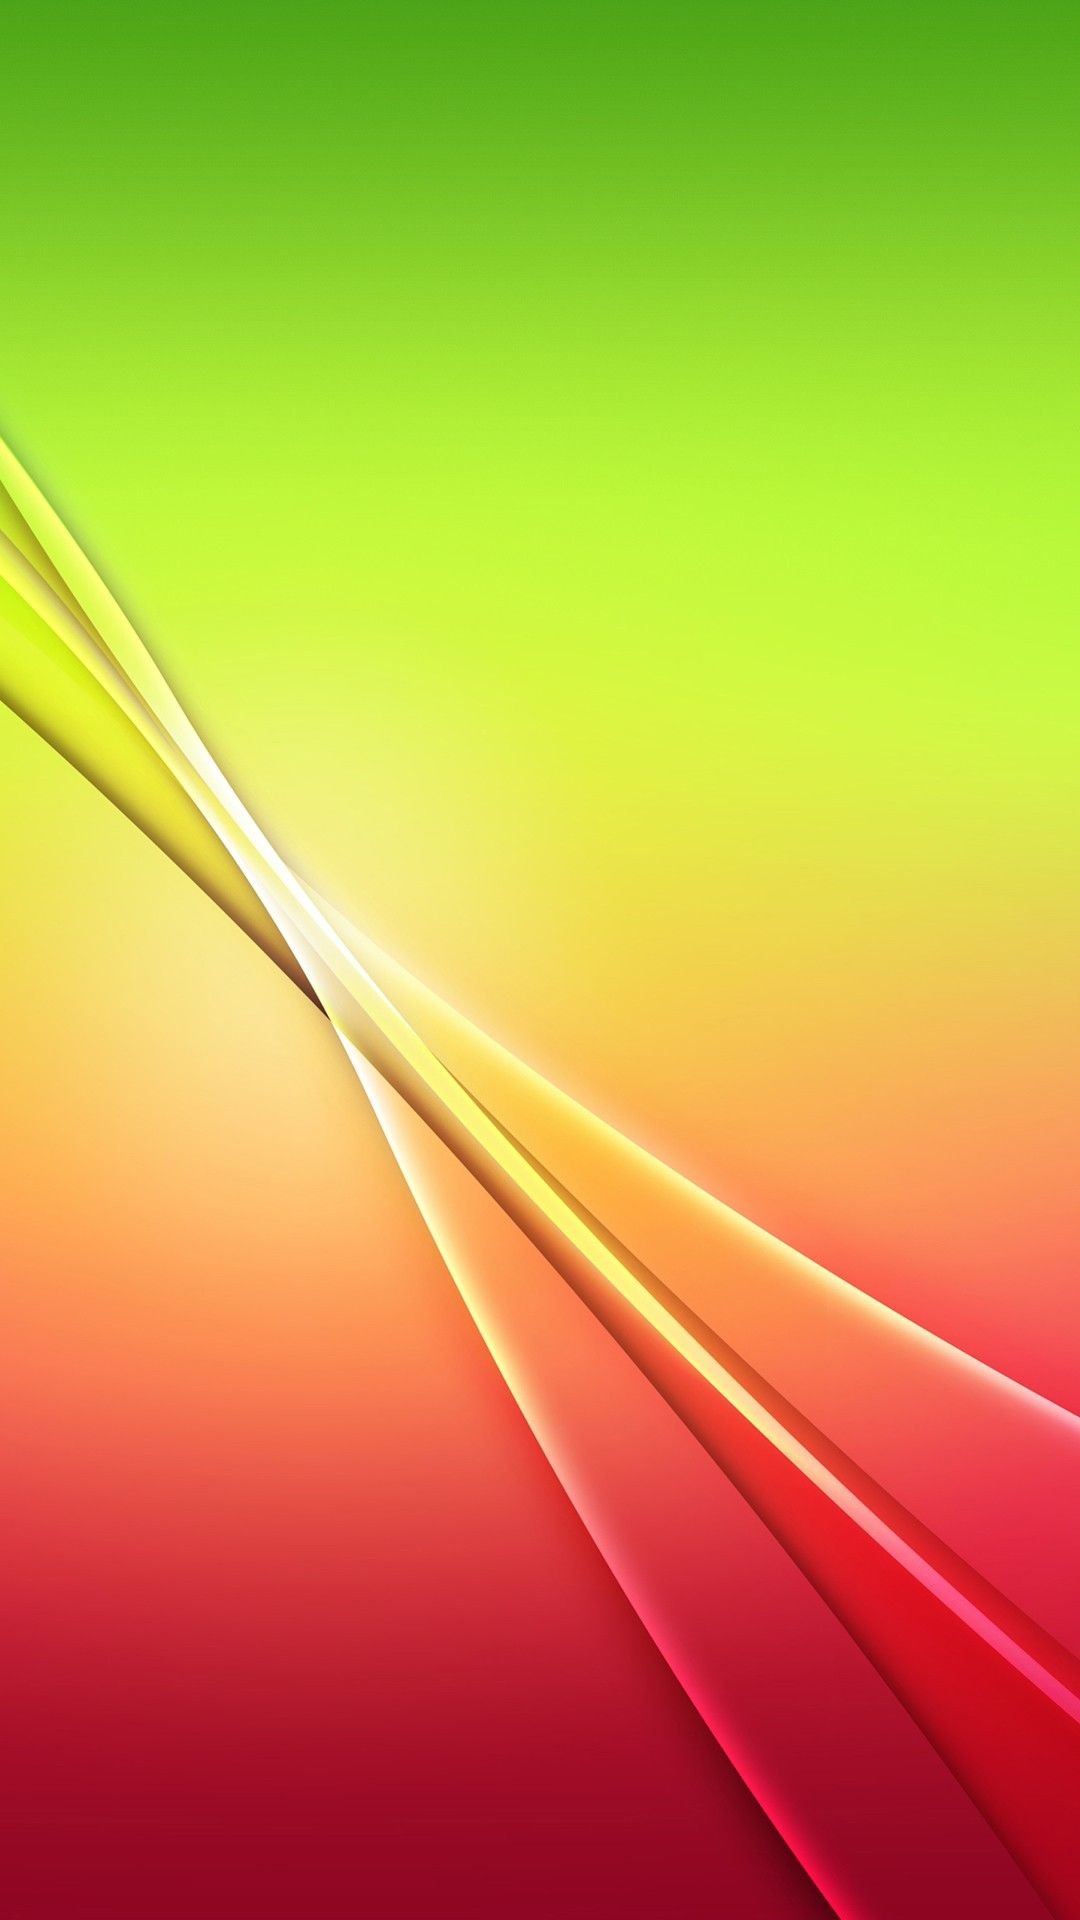 1080x1920 Green Yellow Red Wallpaper - Top Backgrounds & Wallpapers